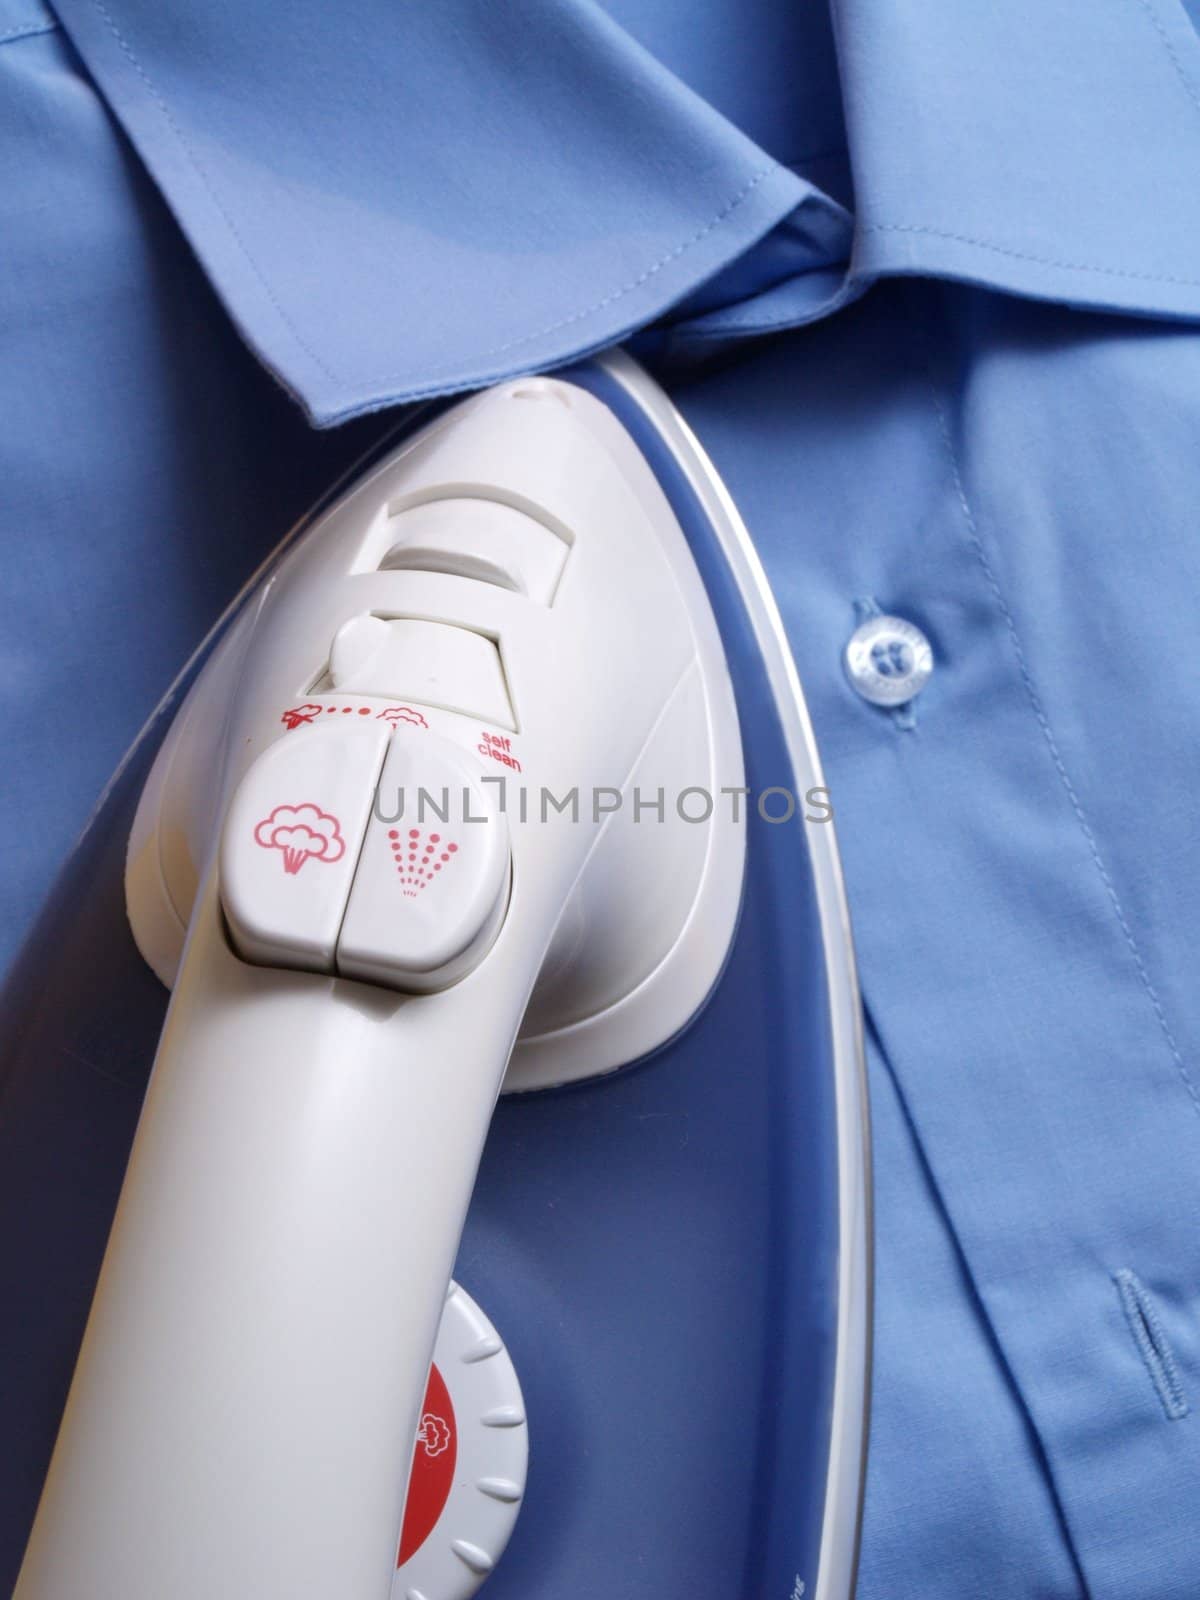 Ironing blue shirt by anderm